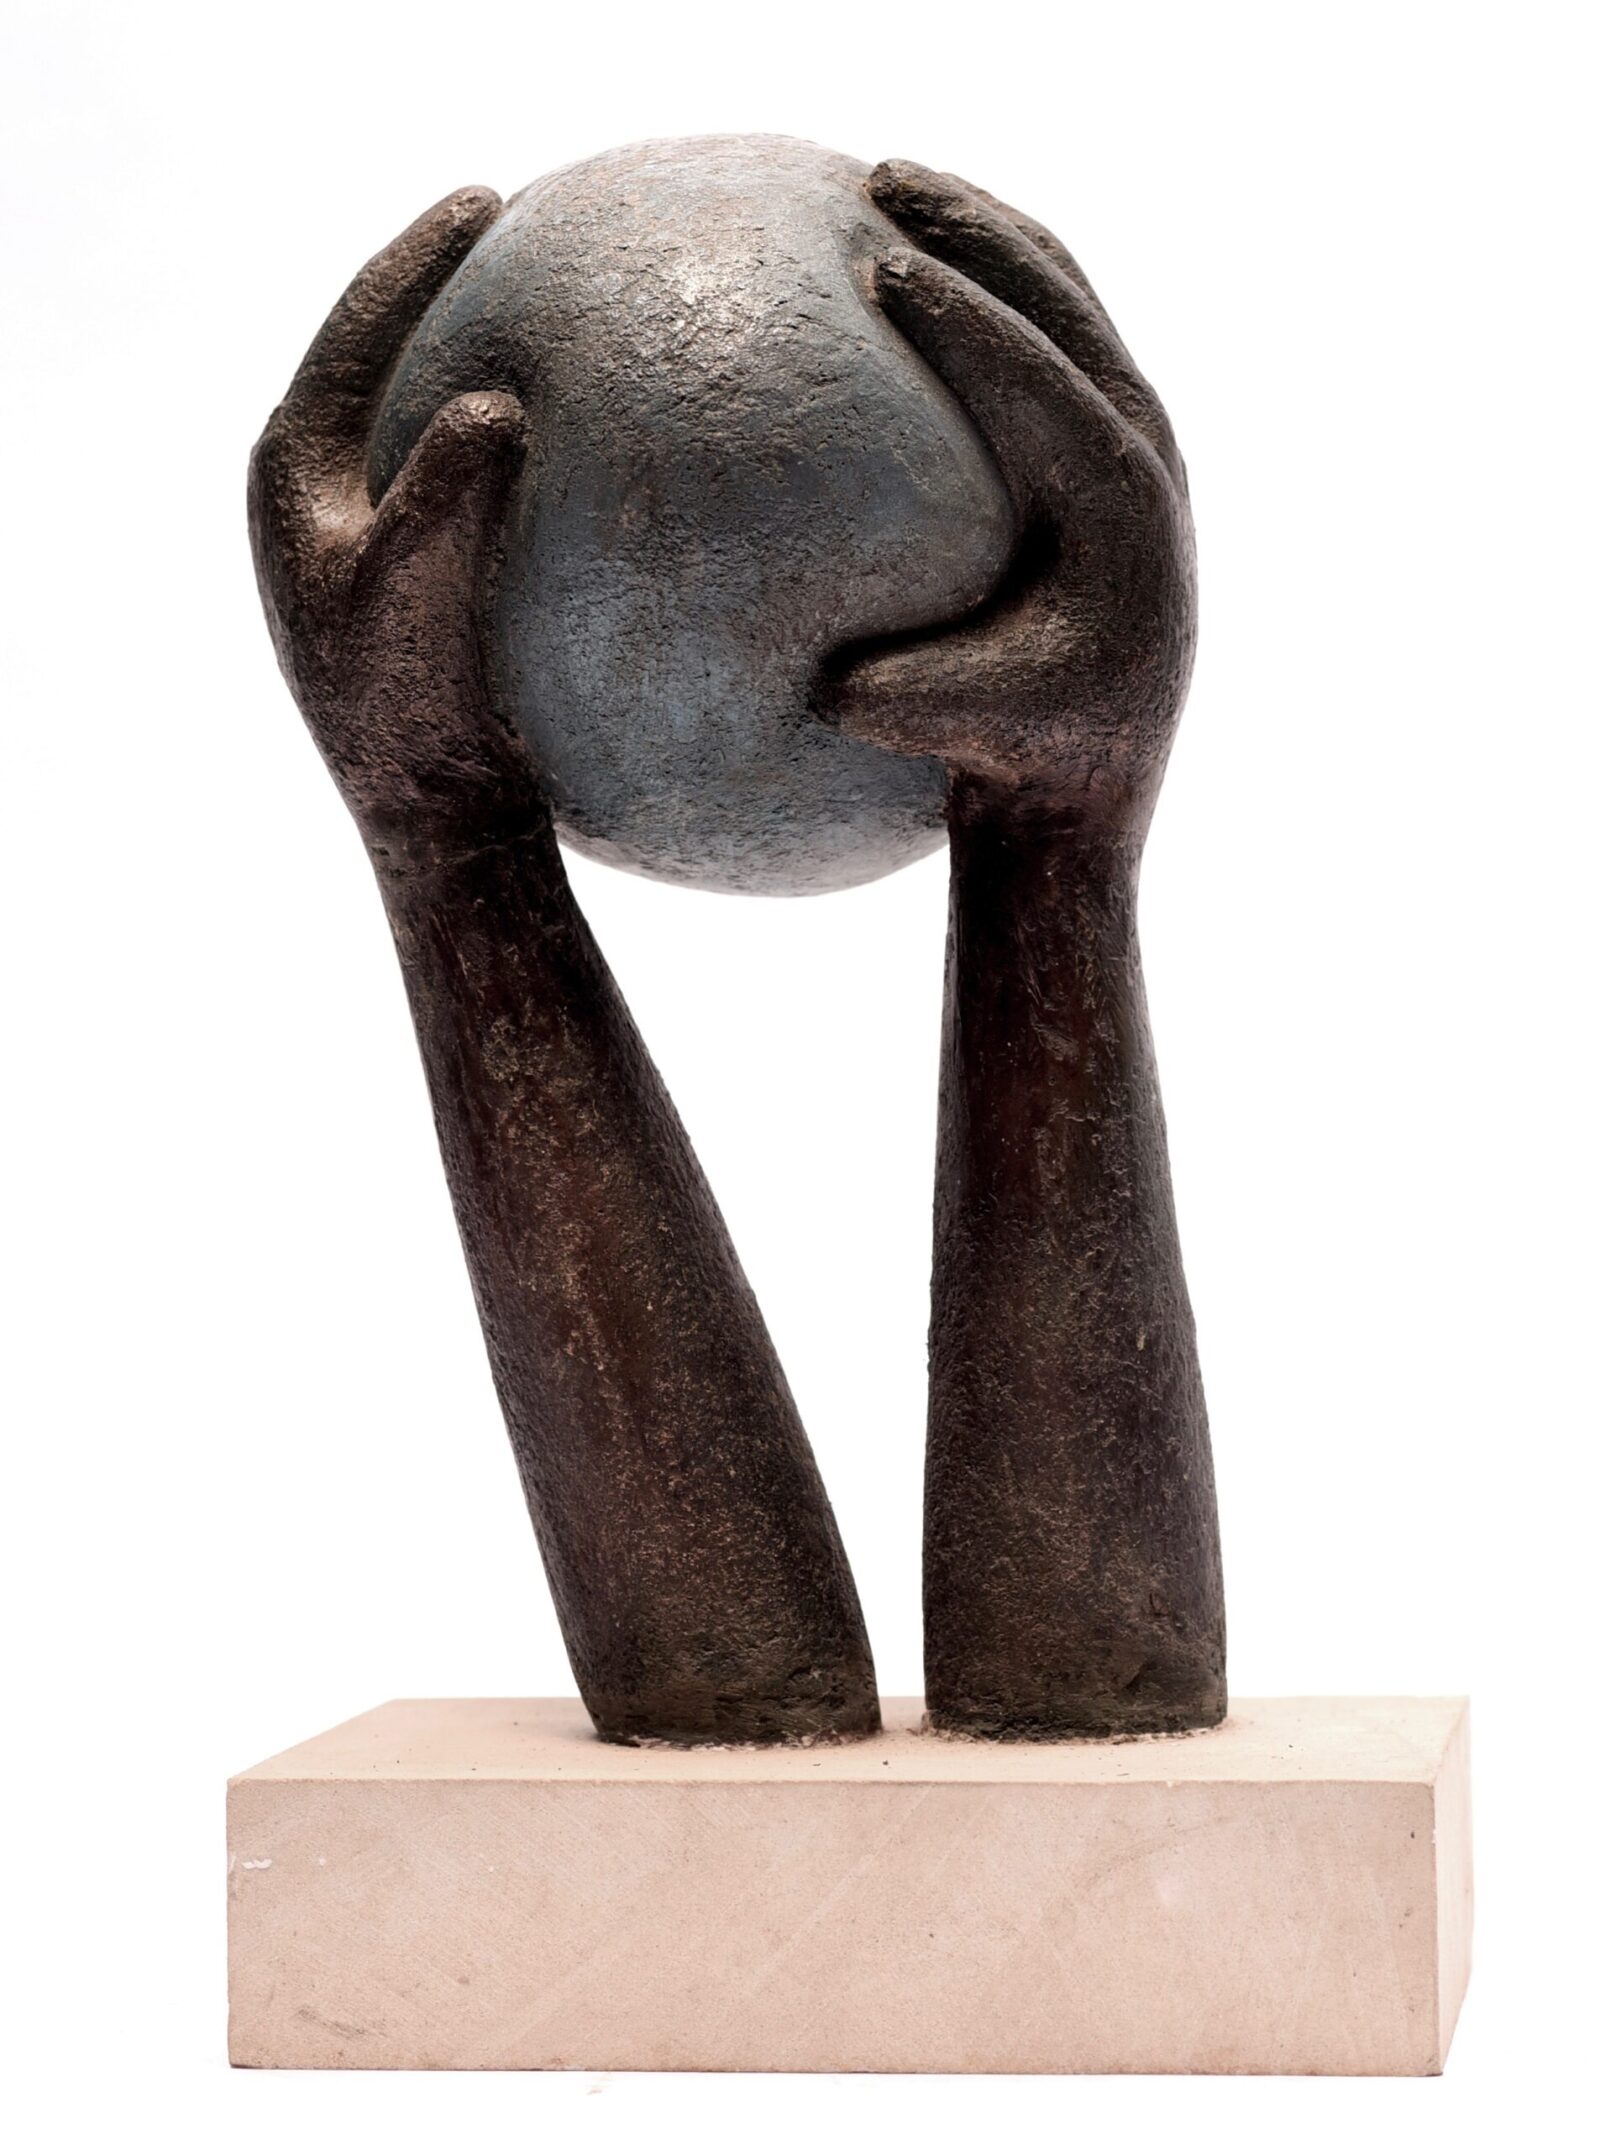 contemporary sculpture of a head held up on its hands